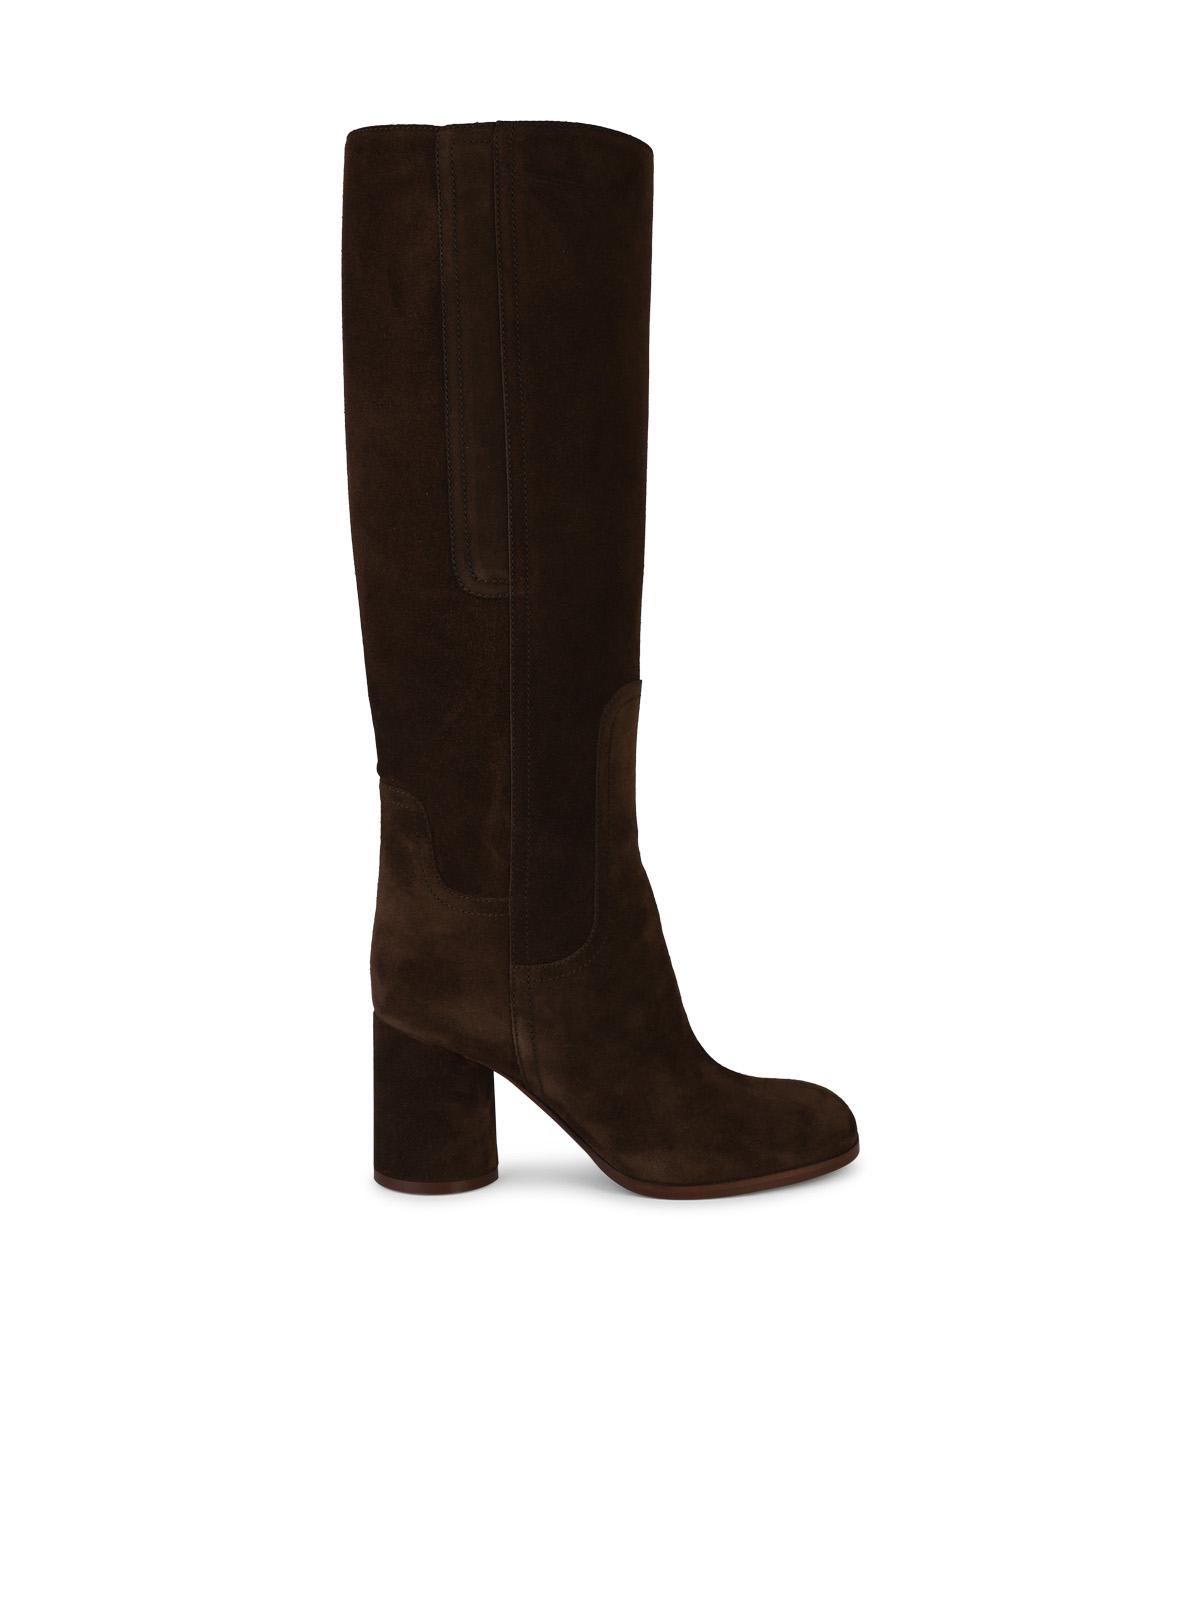 Casadei Cleo Brown Suede Boots